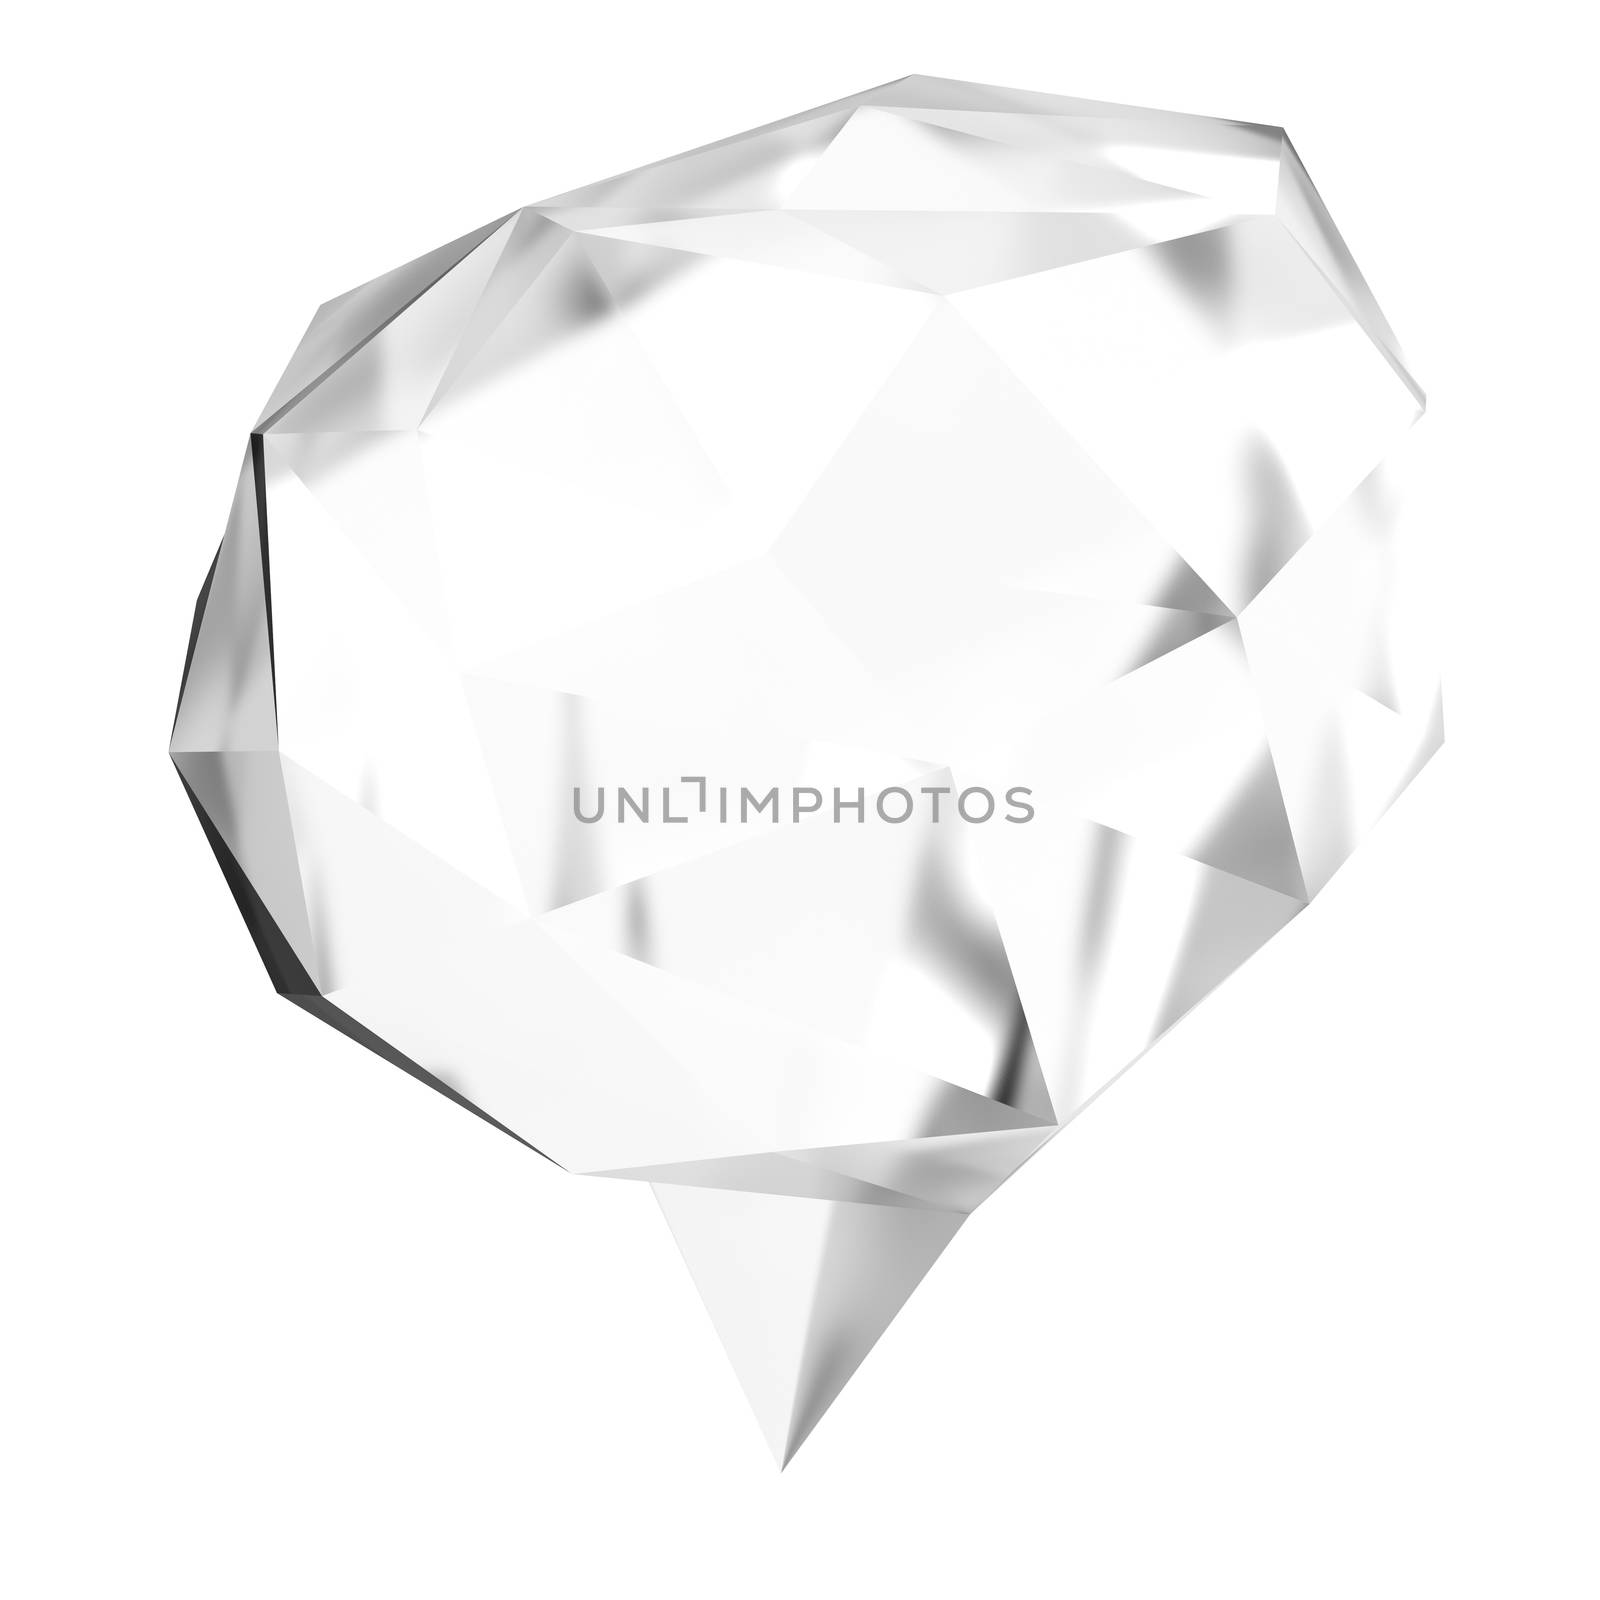 low poly geometric speech bubble on white background